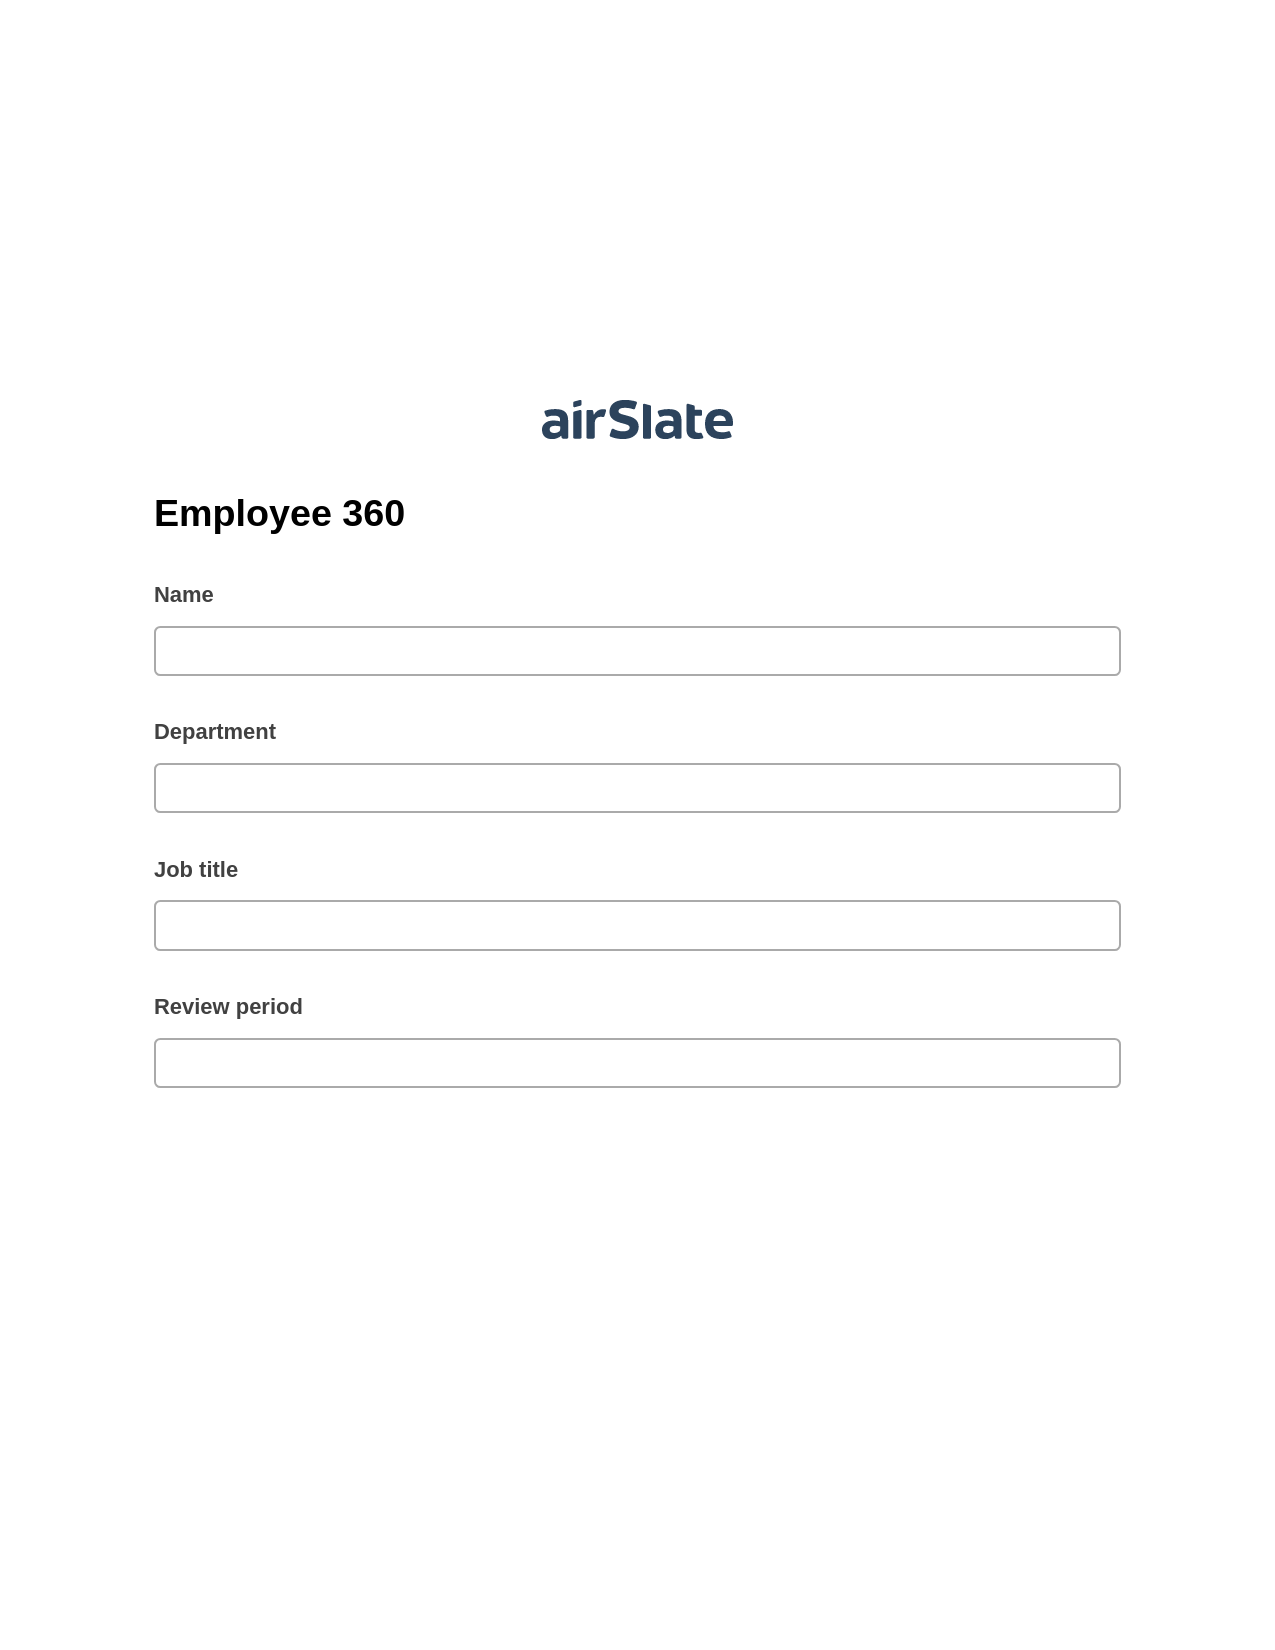 Employee 360 Pre-fill from MS Dynamics 365 Records, Update MS Dynamics 365 Record Bot, Email Notification Postfinish Bot